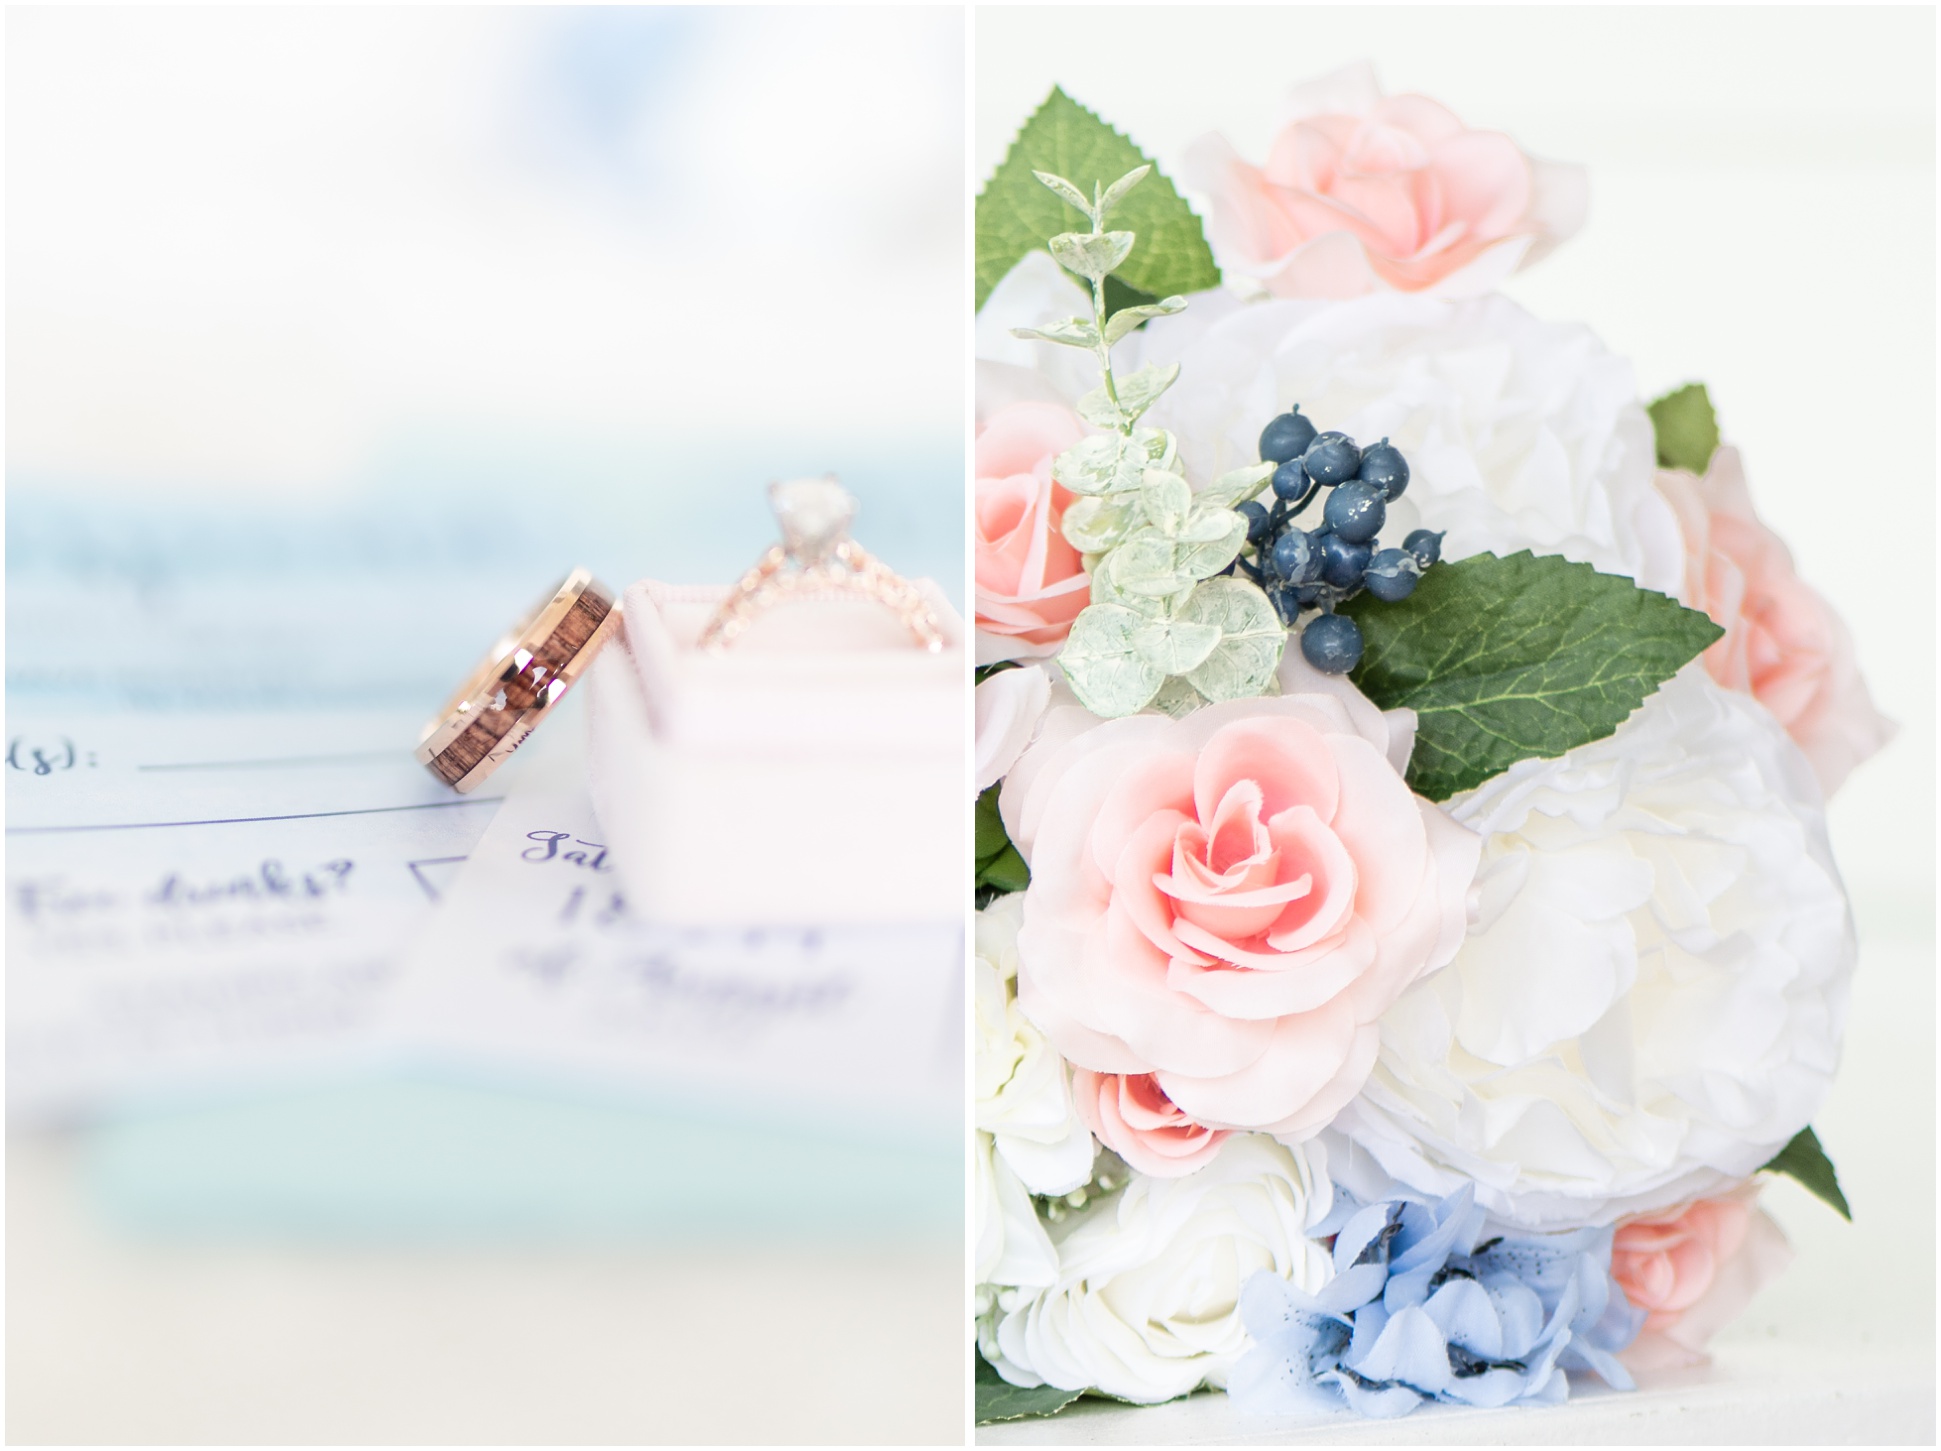 Katie and Rob's Ocean Blue Waterfront Wedding at Weatherly Farm